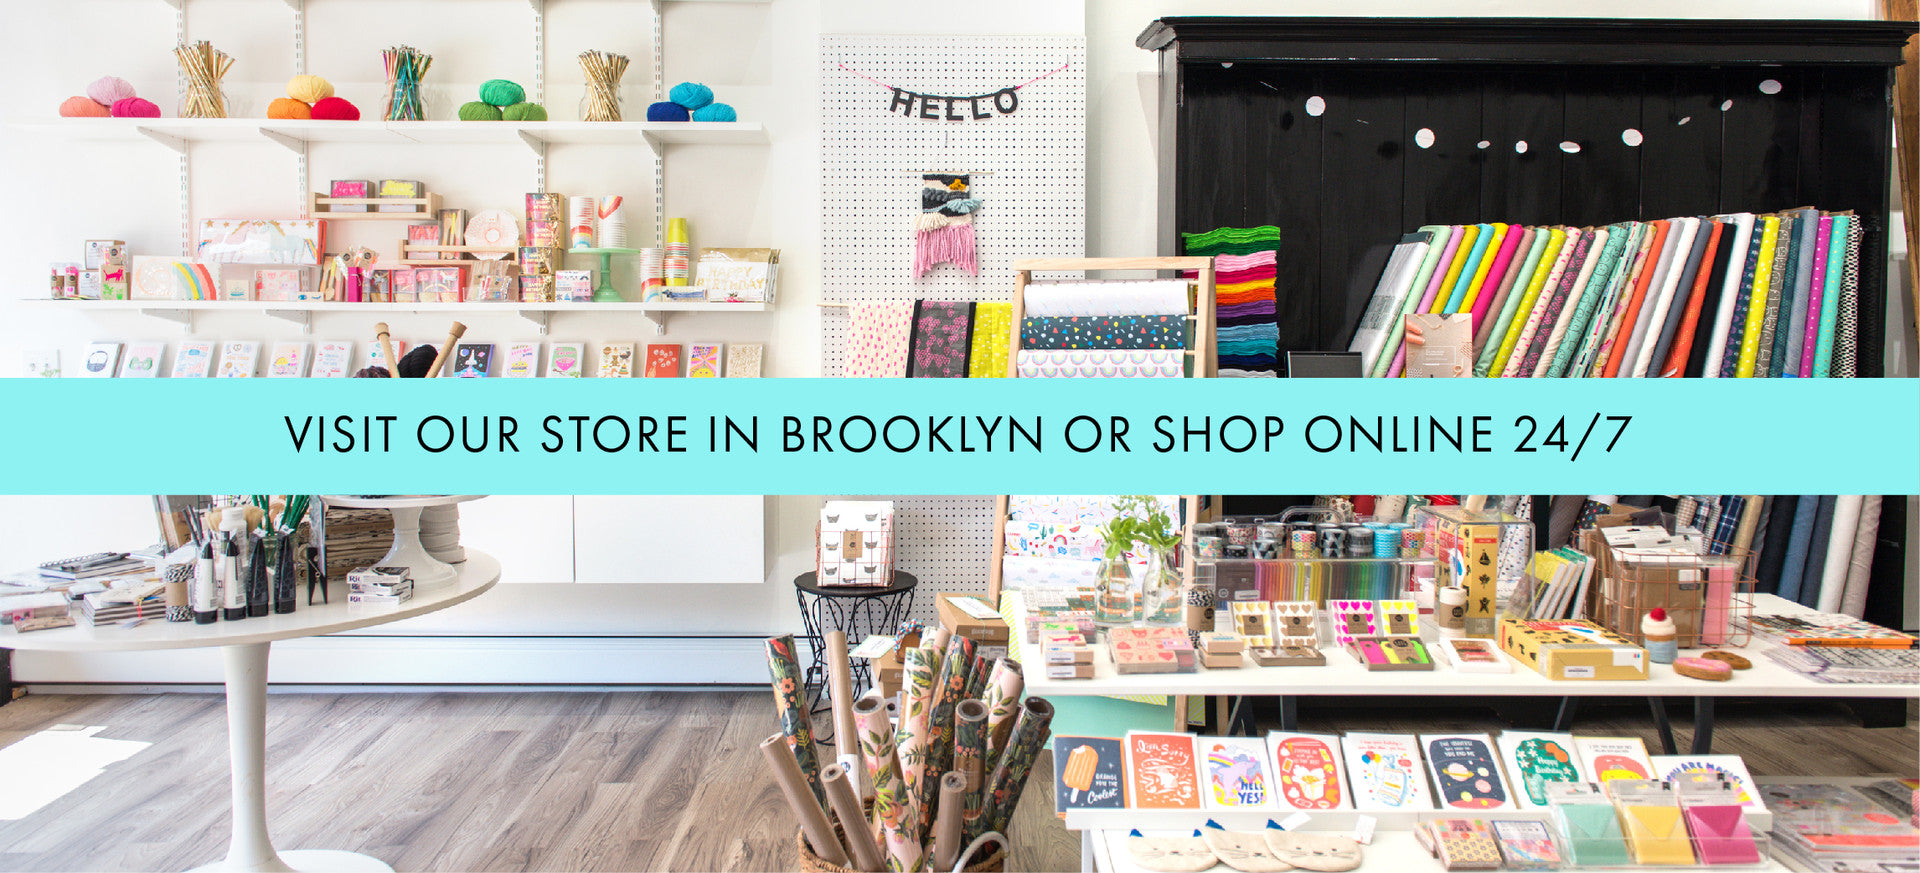 Visit our store in Brooklyn